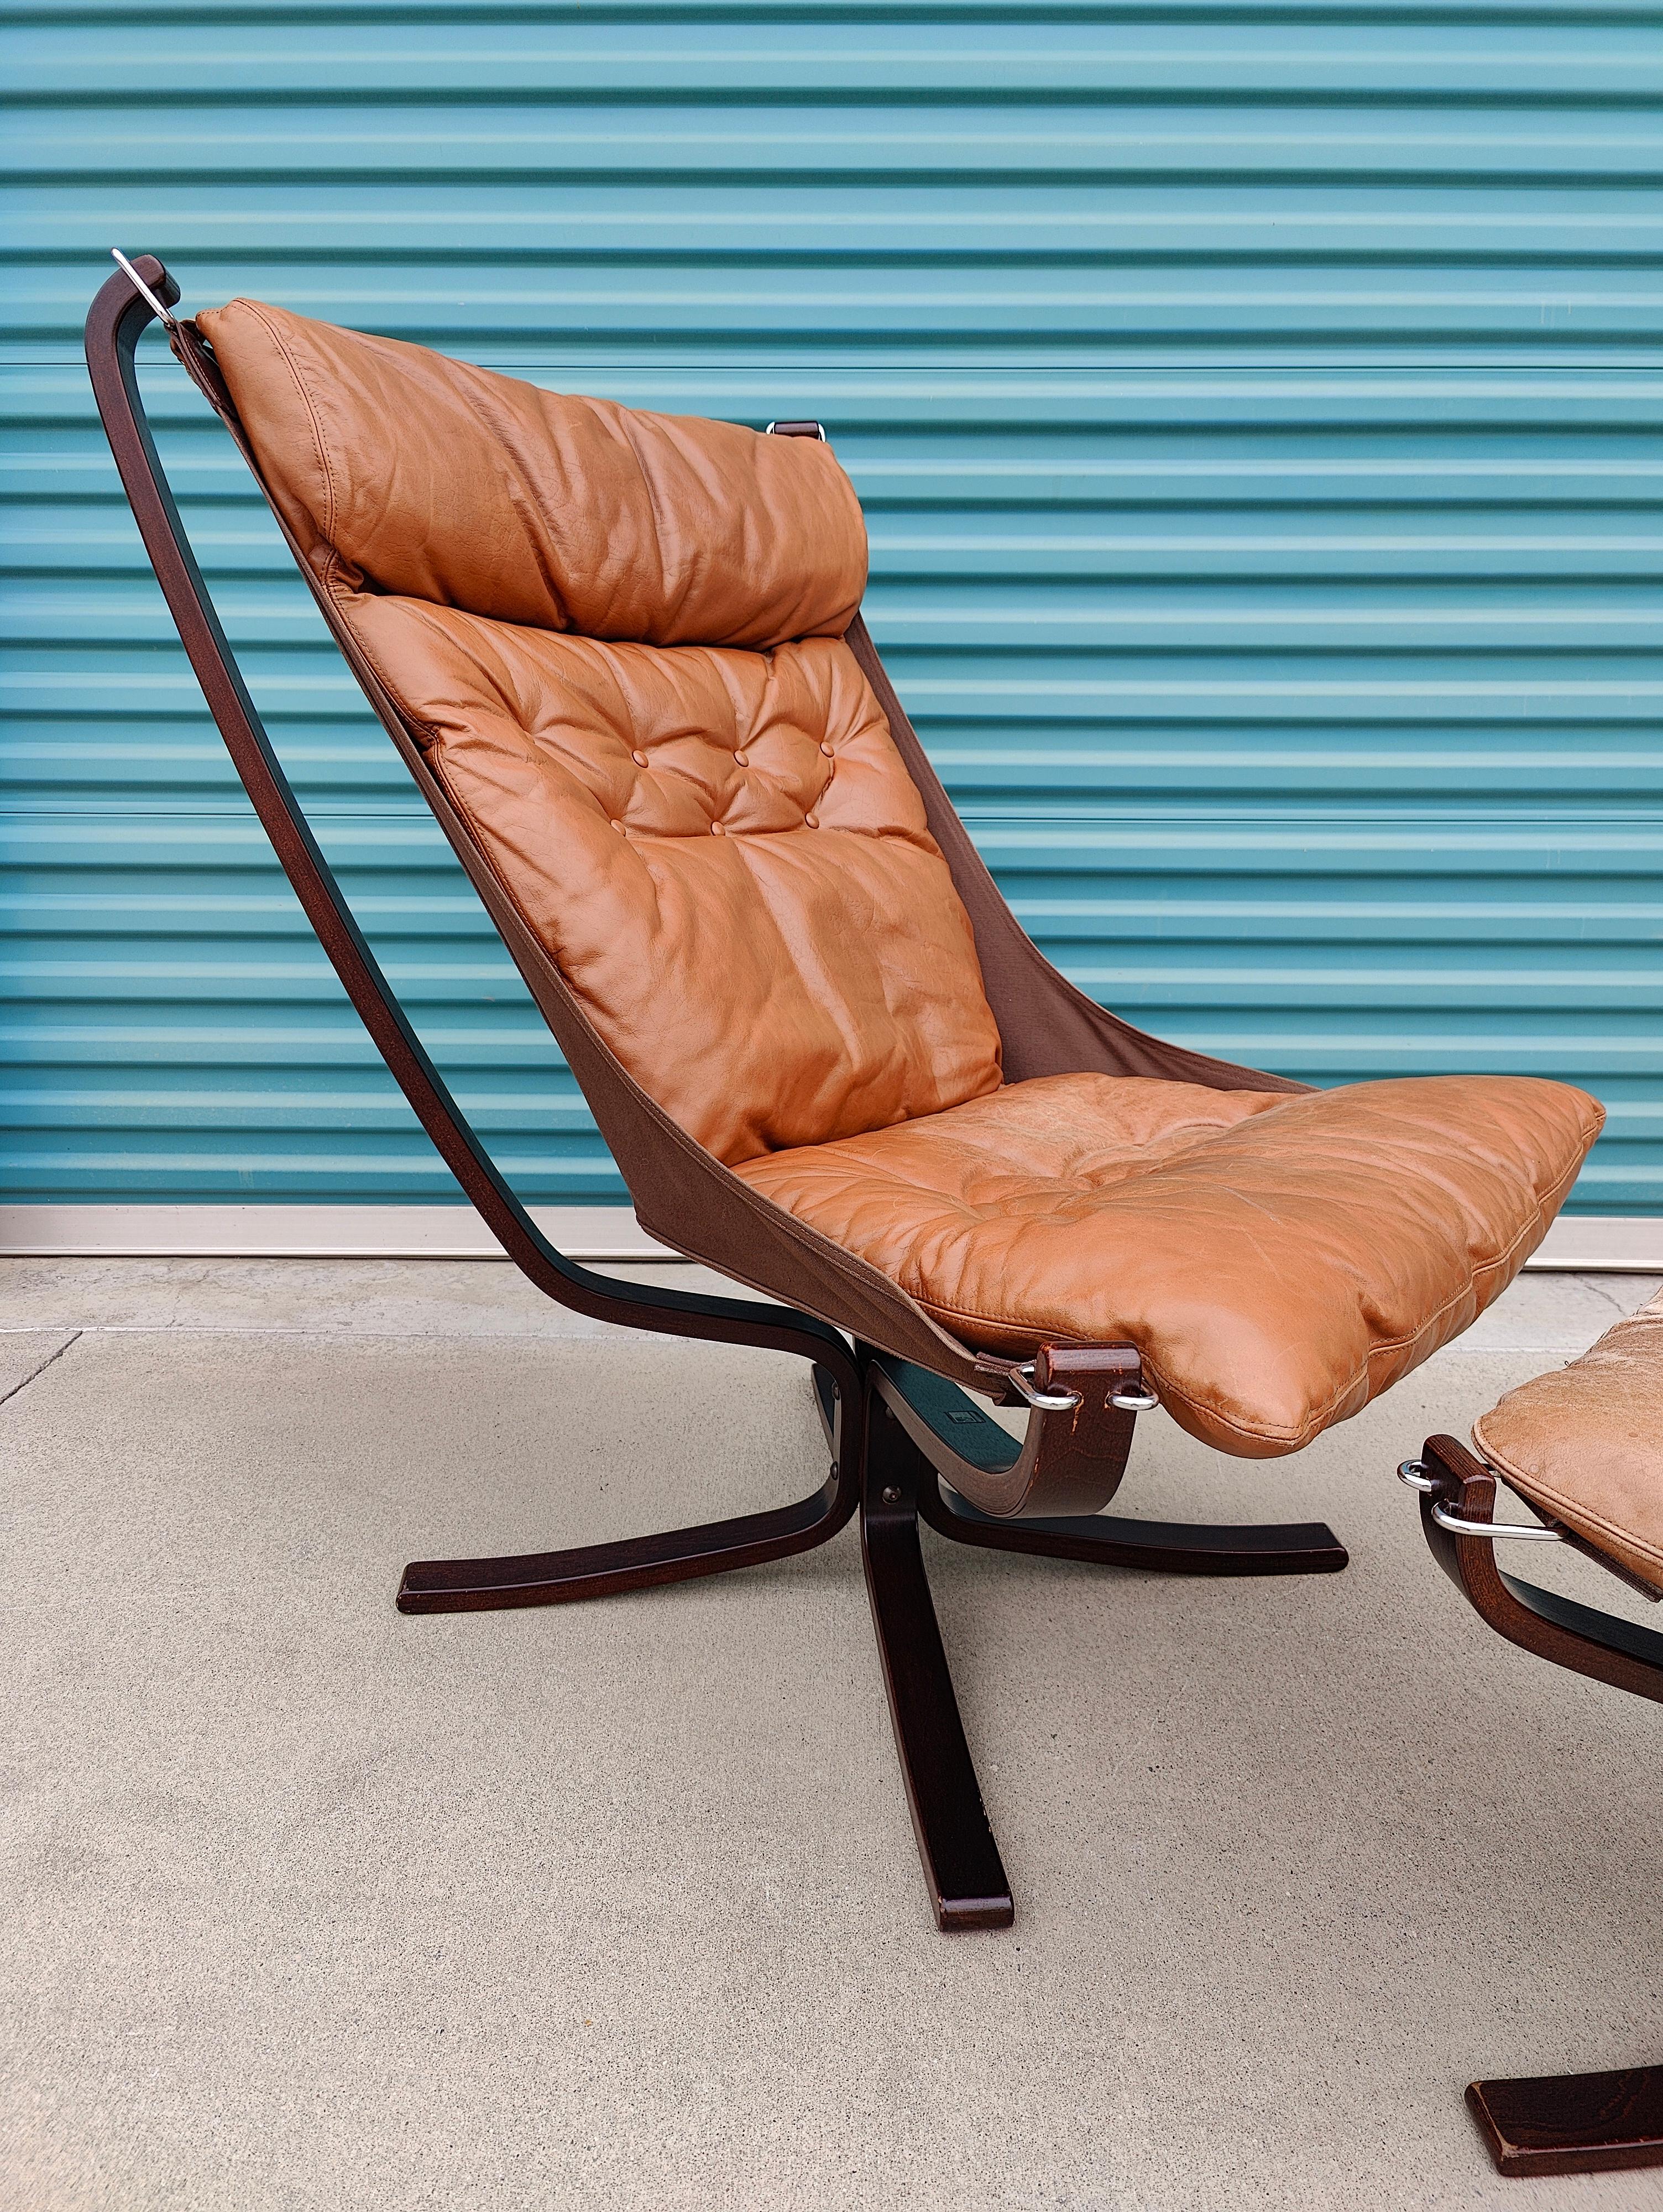 Falcon chair by Sigurd Ressel for Vatne Mobler, circa 1970s. Leather on chair is in great condition with good amount of patina. Ottoman has some wear and two buttons missing on the cushion. Sling in great shape. Tagged with original labels. Chair